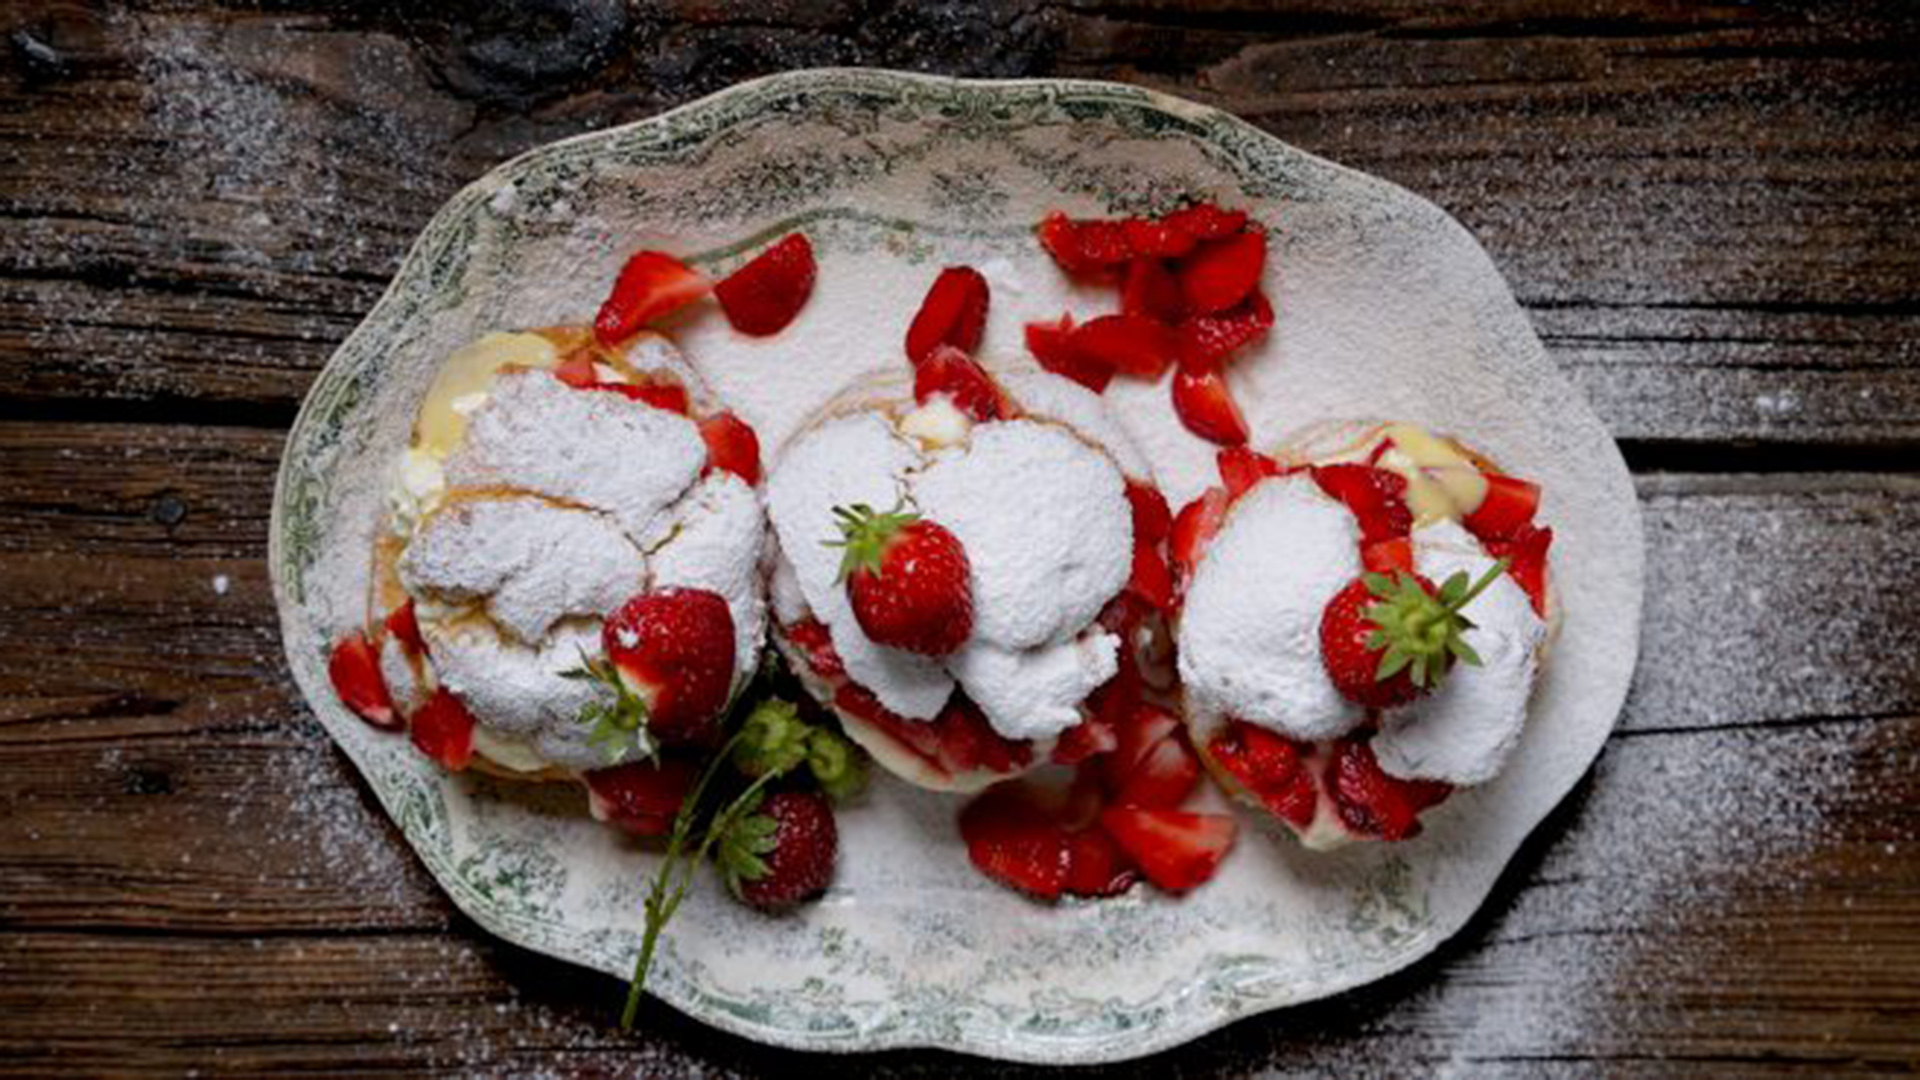 A tray of creampuffs covered in whipped cream and strawberries.